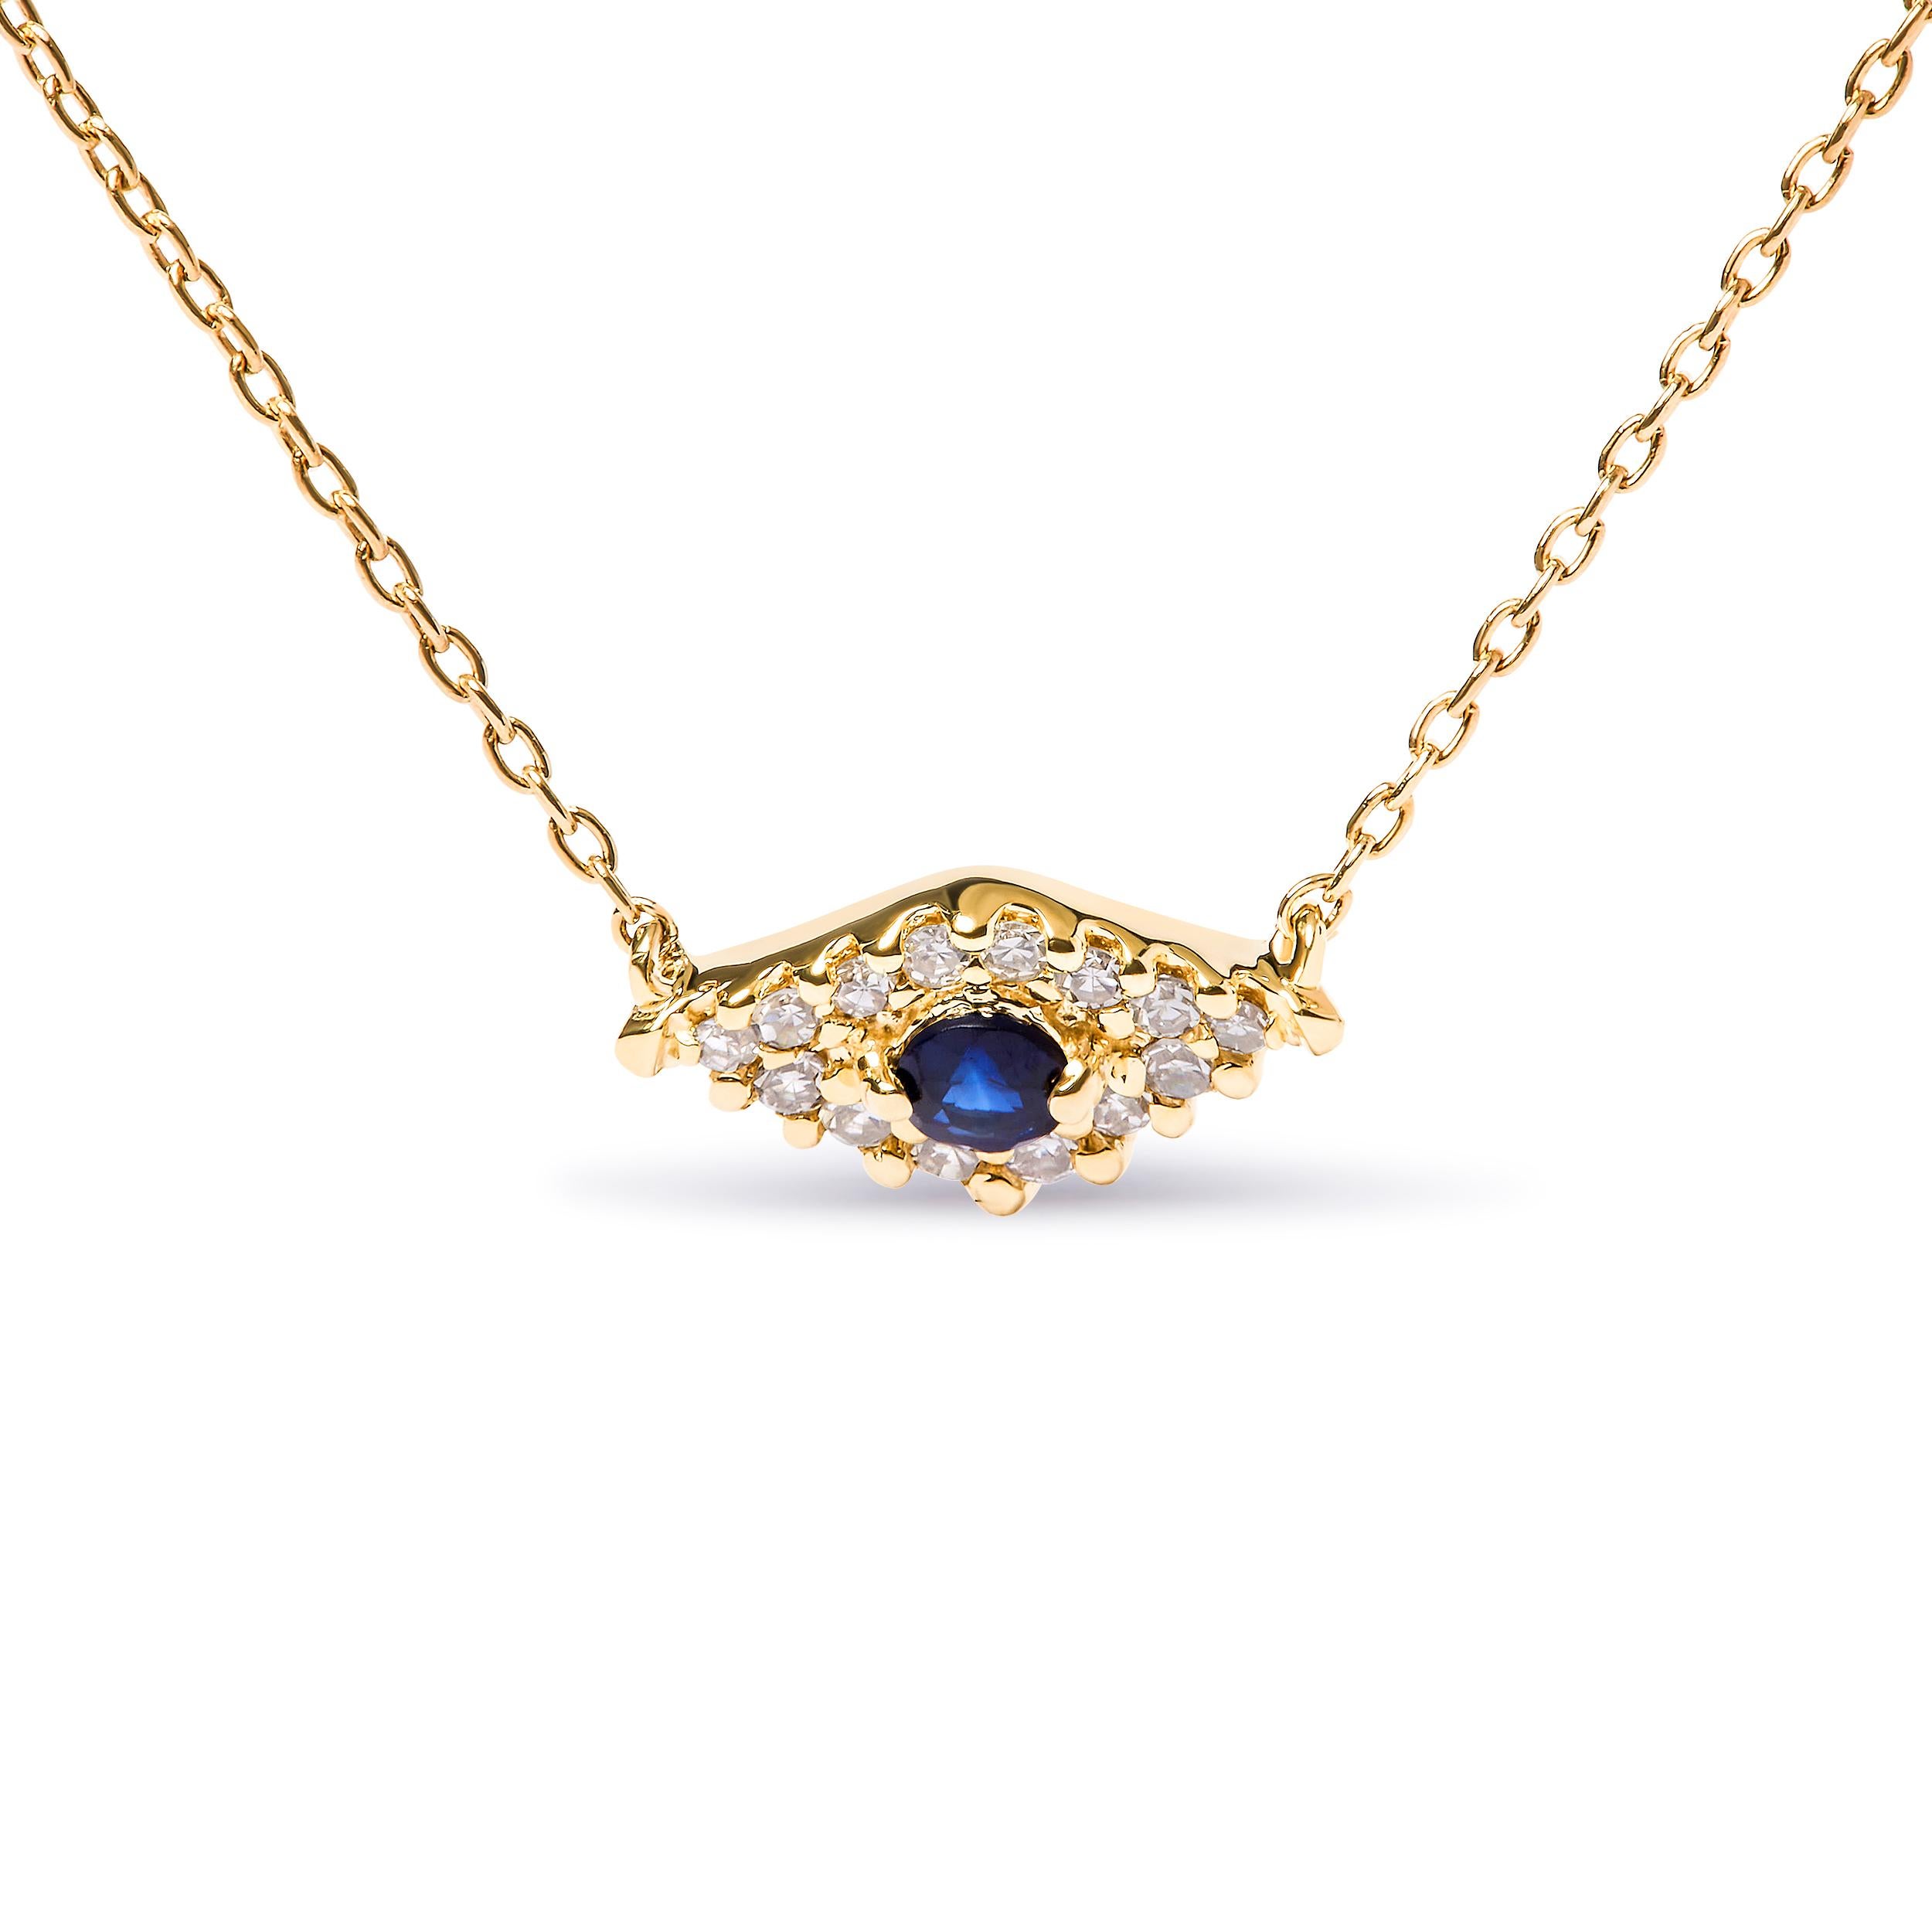 Introducing a mesmerizing masterpiece, this 10K Yellow Gold Evil Eye Pendant Necklace is a symbol of protection and beauty. Crafted with exquisite attention to detail, it features a captivating blue sapphire at its center, surrounded by 15 dazzling